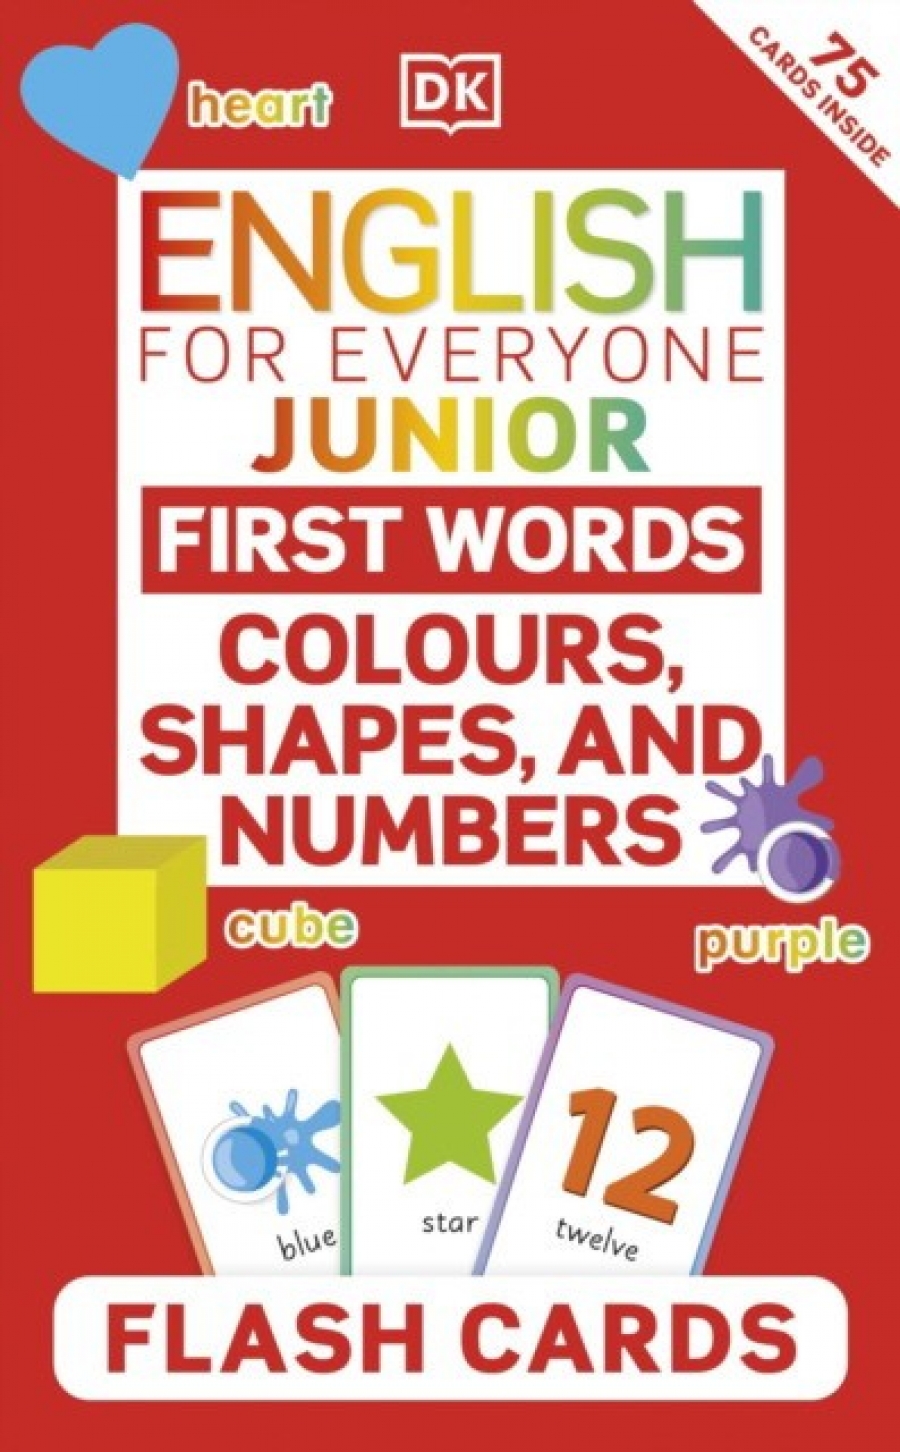 Dk English for everyone junior first words colours, shapes, and numbers flash cards 